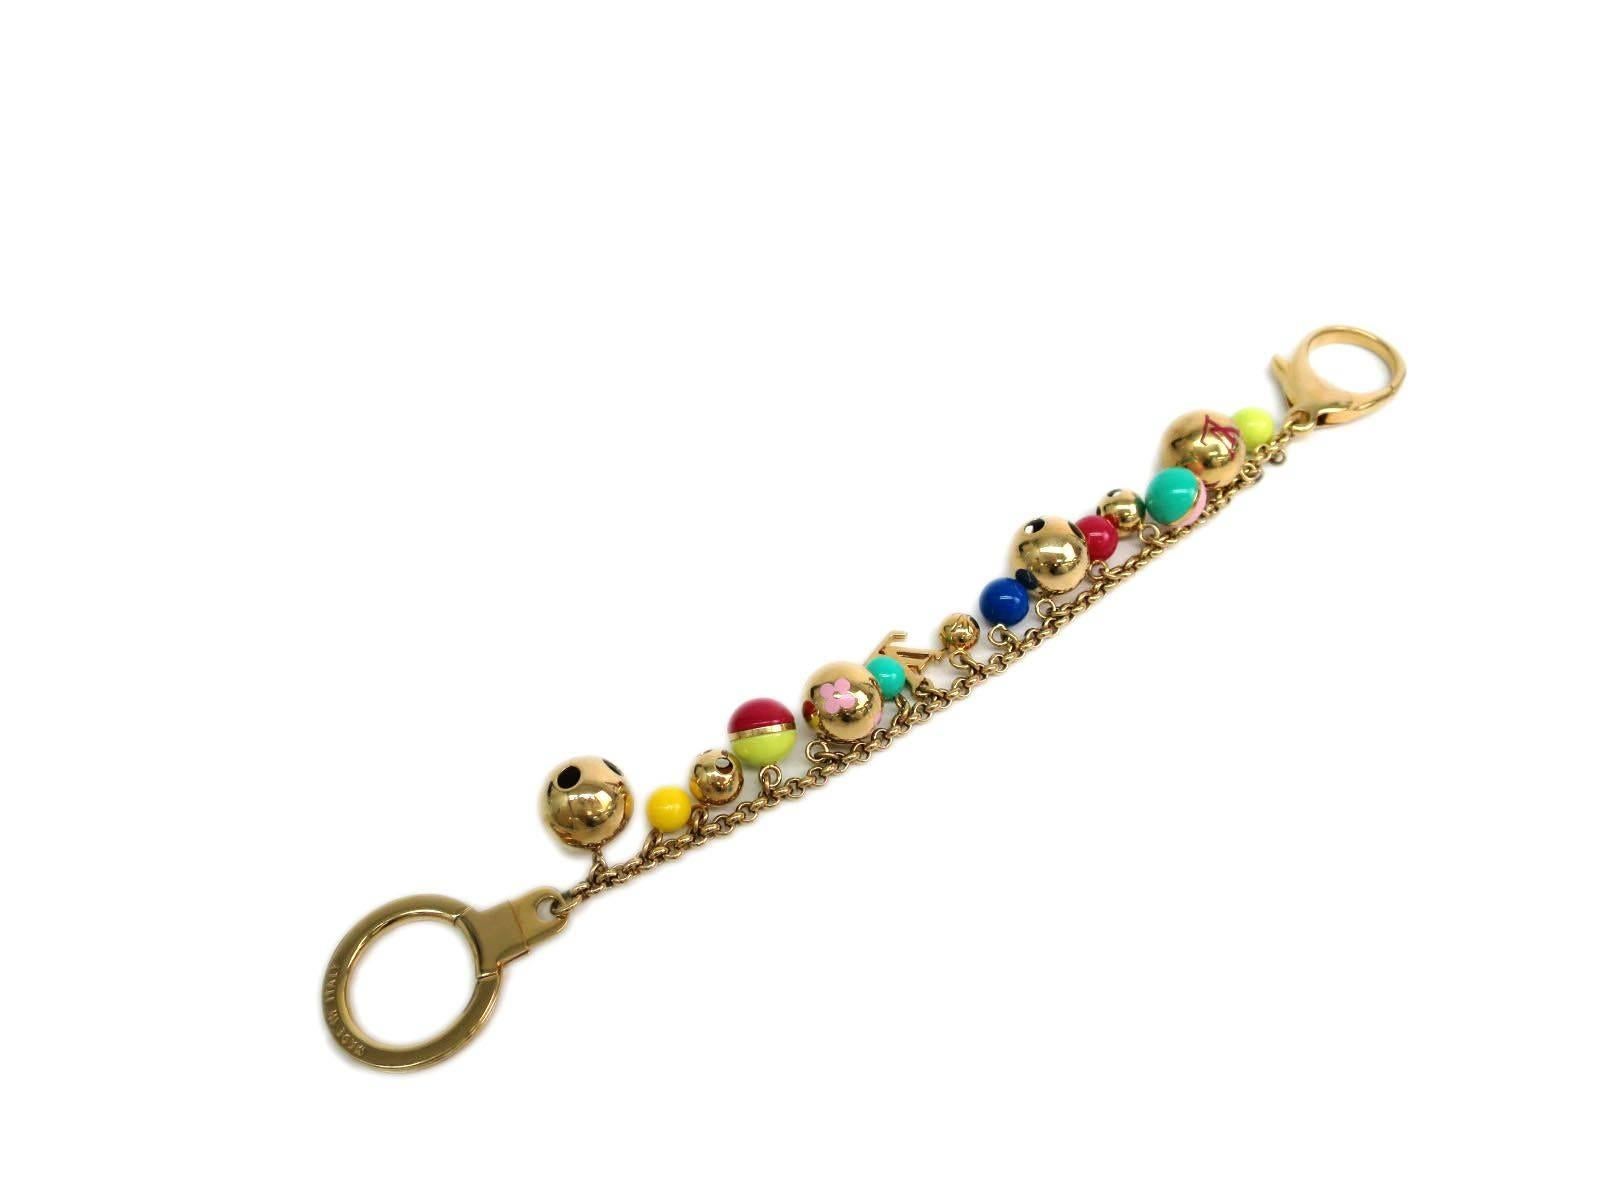 CURATOR'S NOTES

Brass
Gold tone and multicolor
Measures 10